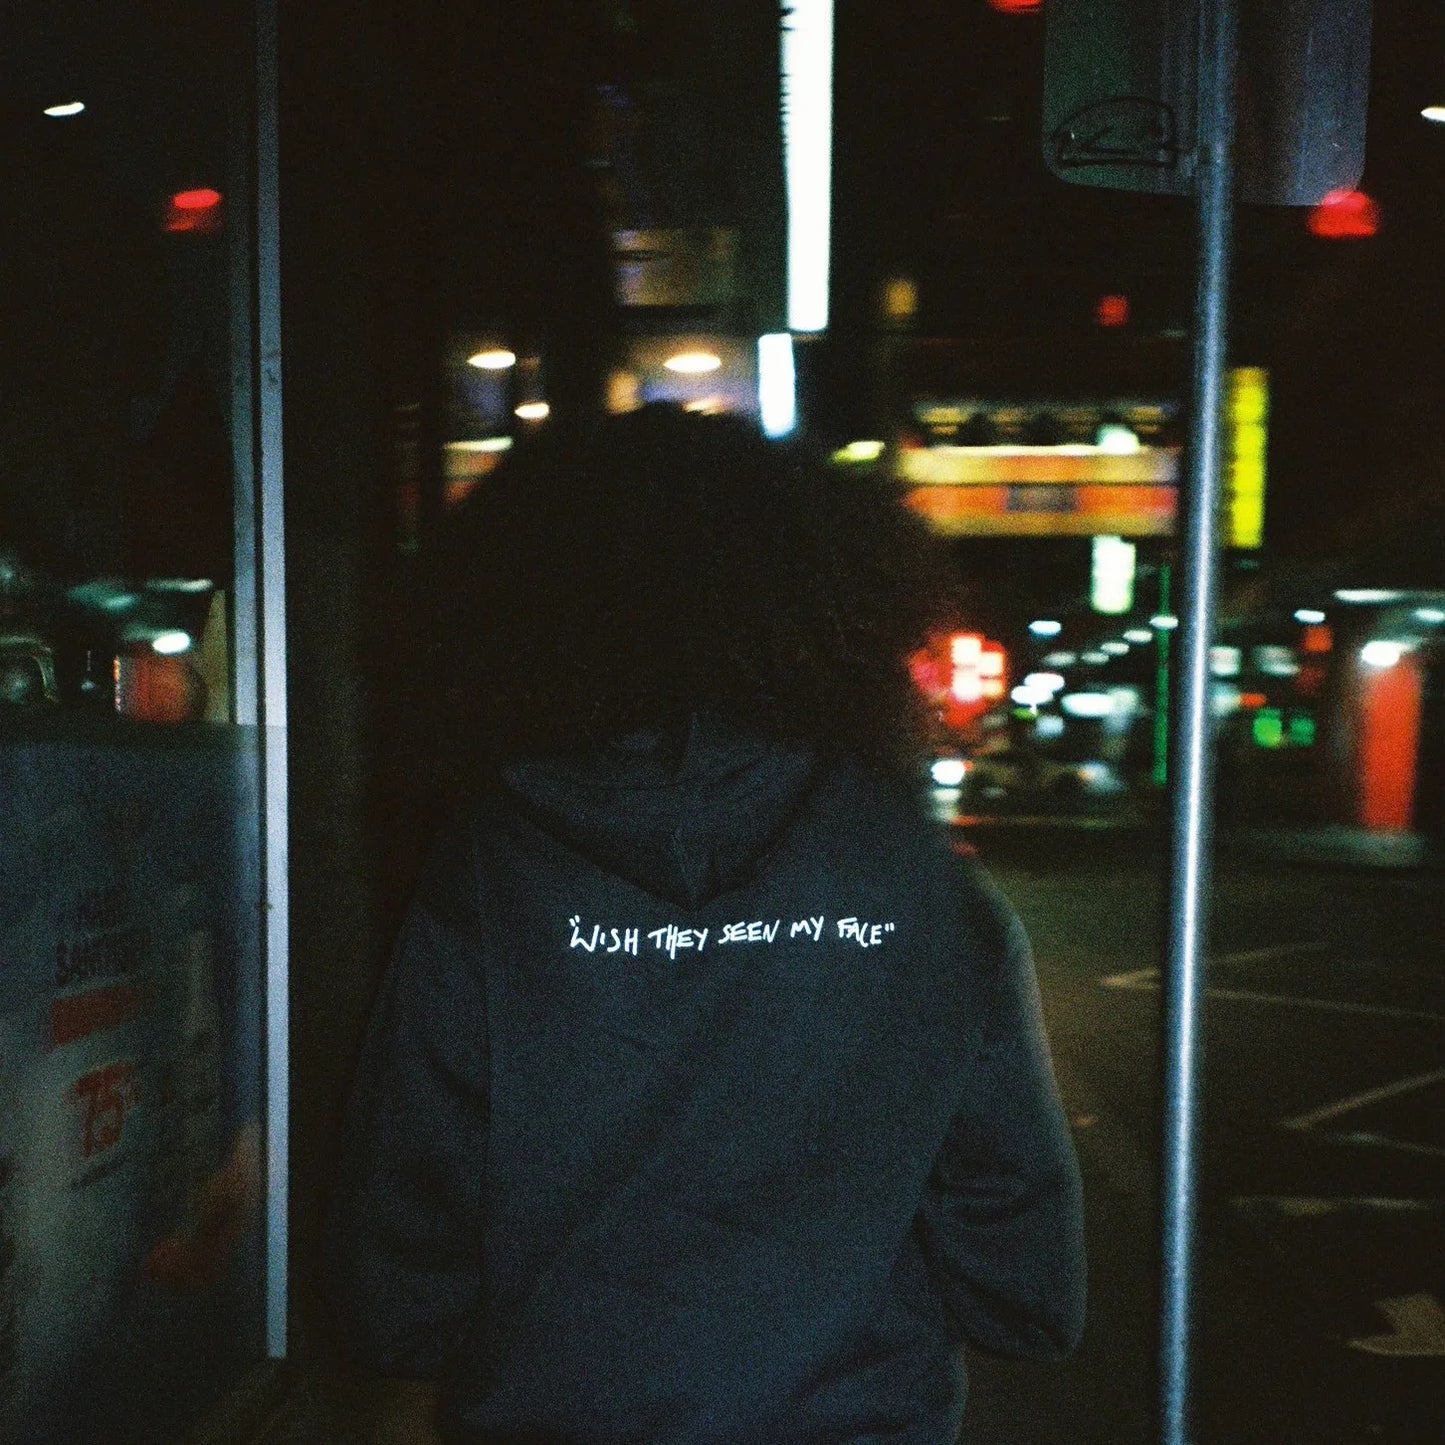 Person wearing the green Lithe hoodie with "wish they seen my face" text on the back, walking down a street at night. Created after the popular single. Released in 2022.